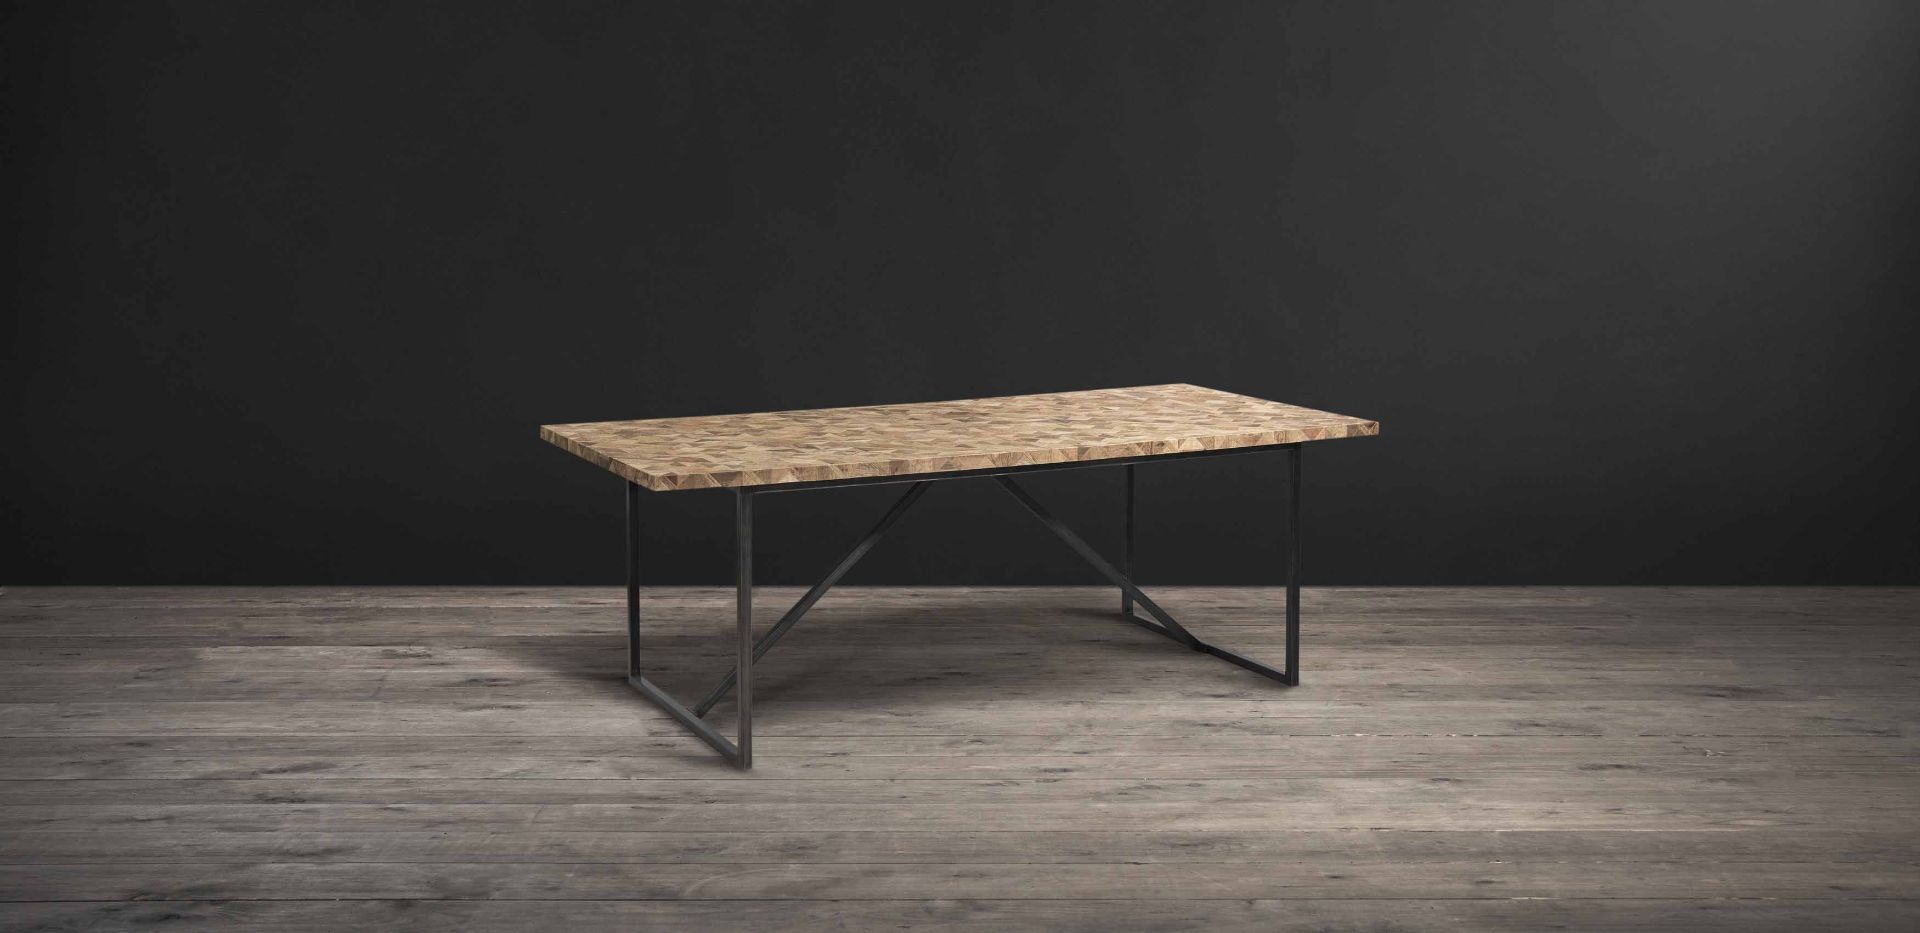 Vestige Classic Dining Table “A modern take on old timber” A classic vintage material is given a